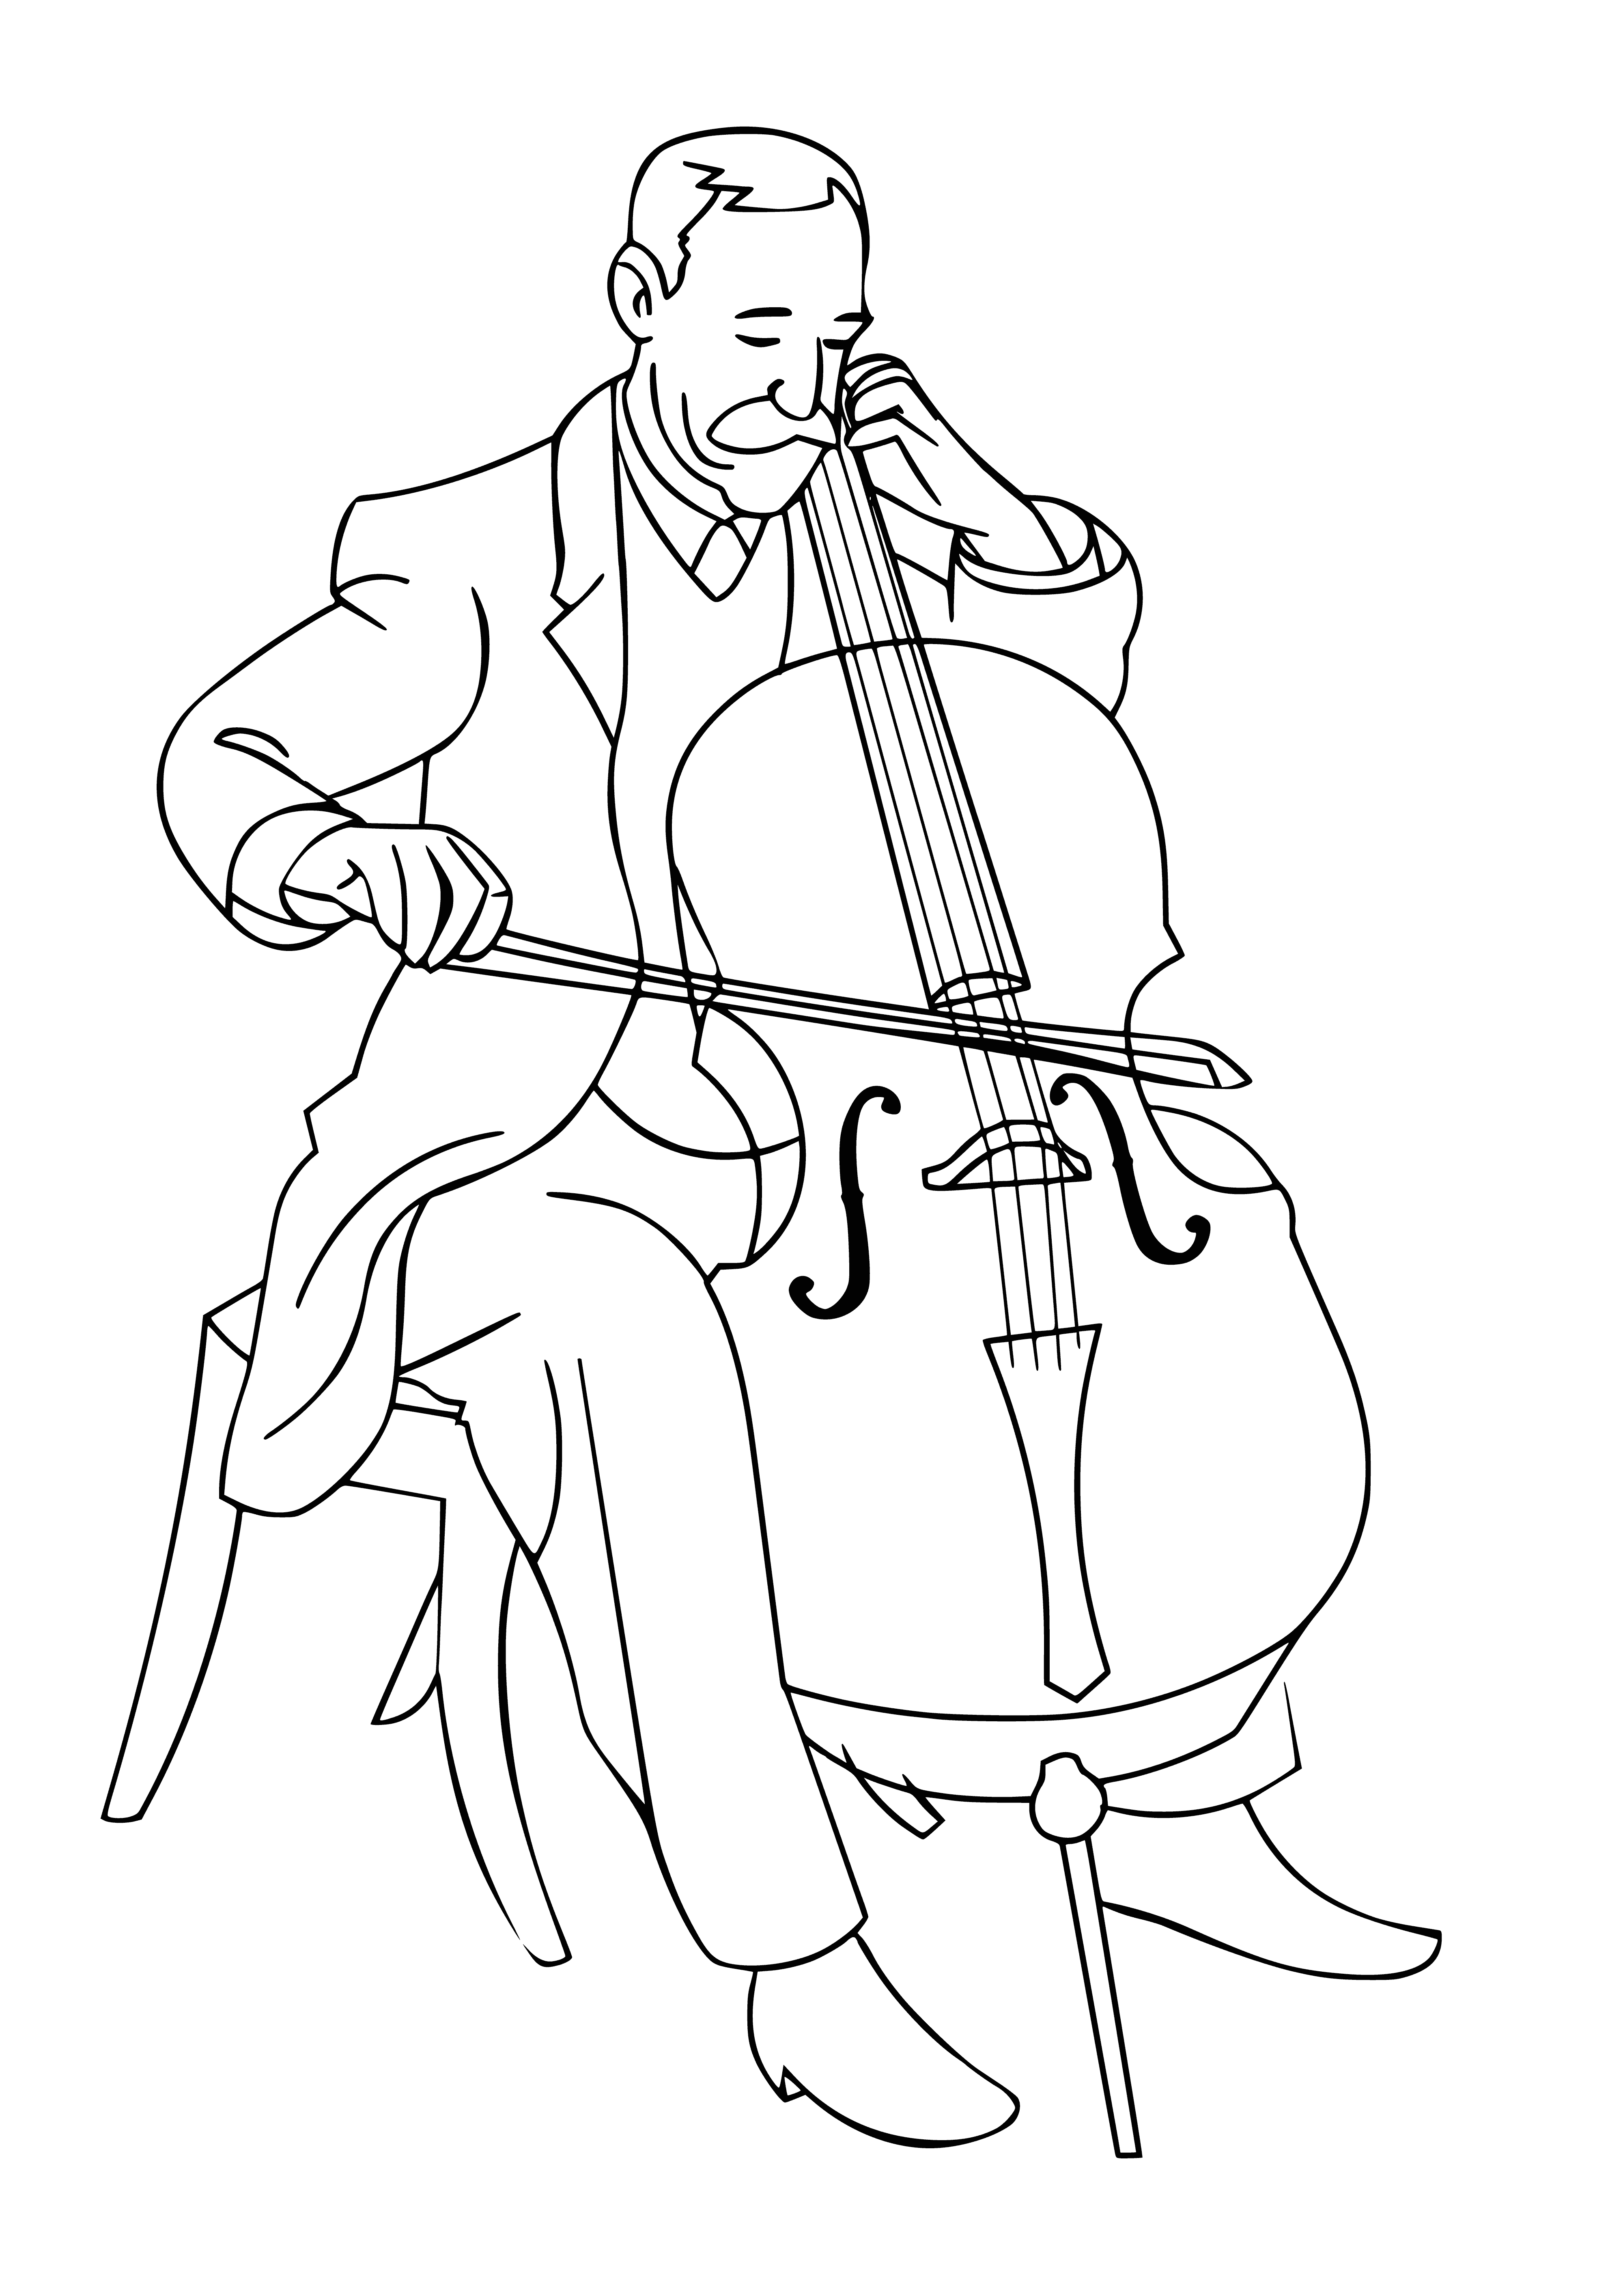 coloring page: Person is playing a gentle melody.

Person strums cello, playing peaceful melody while admiring the instrument.